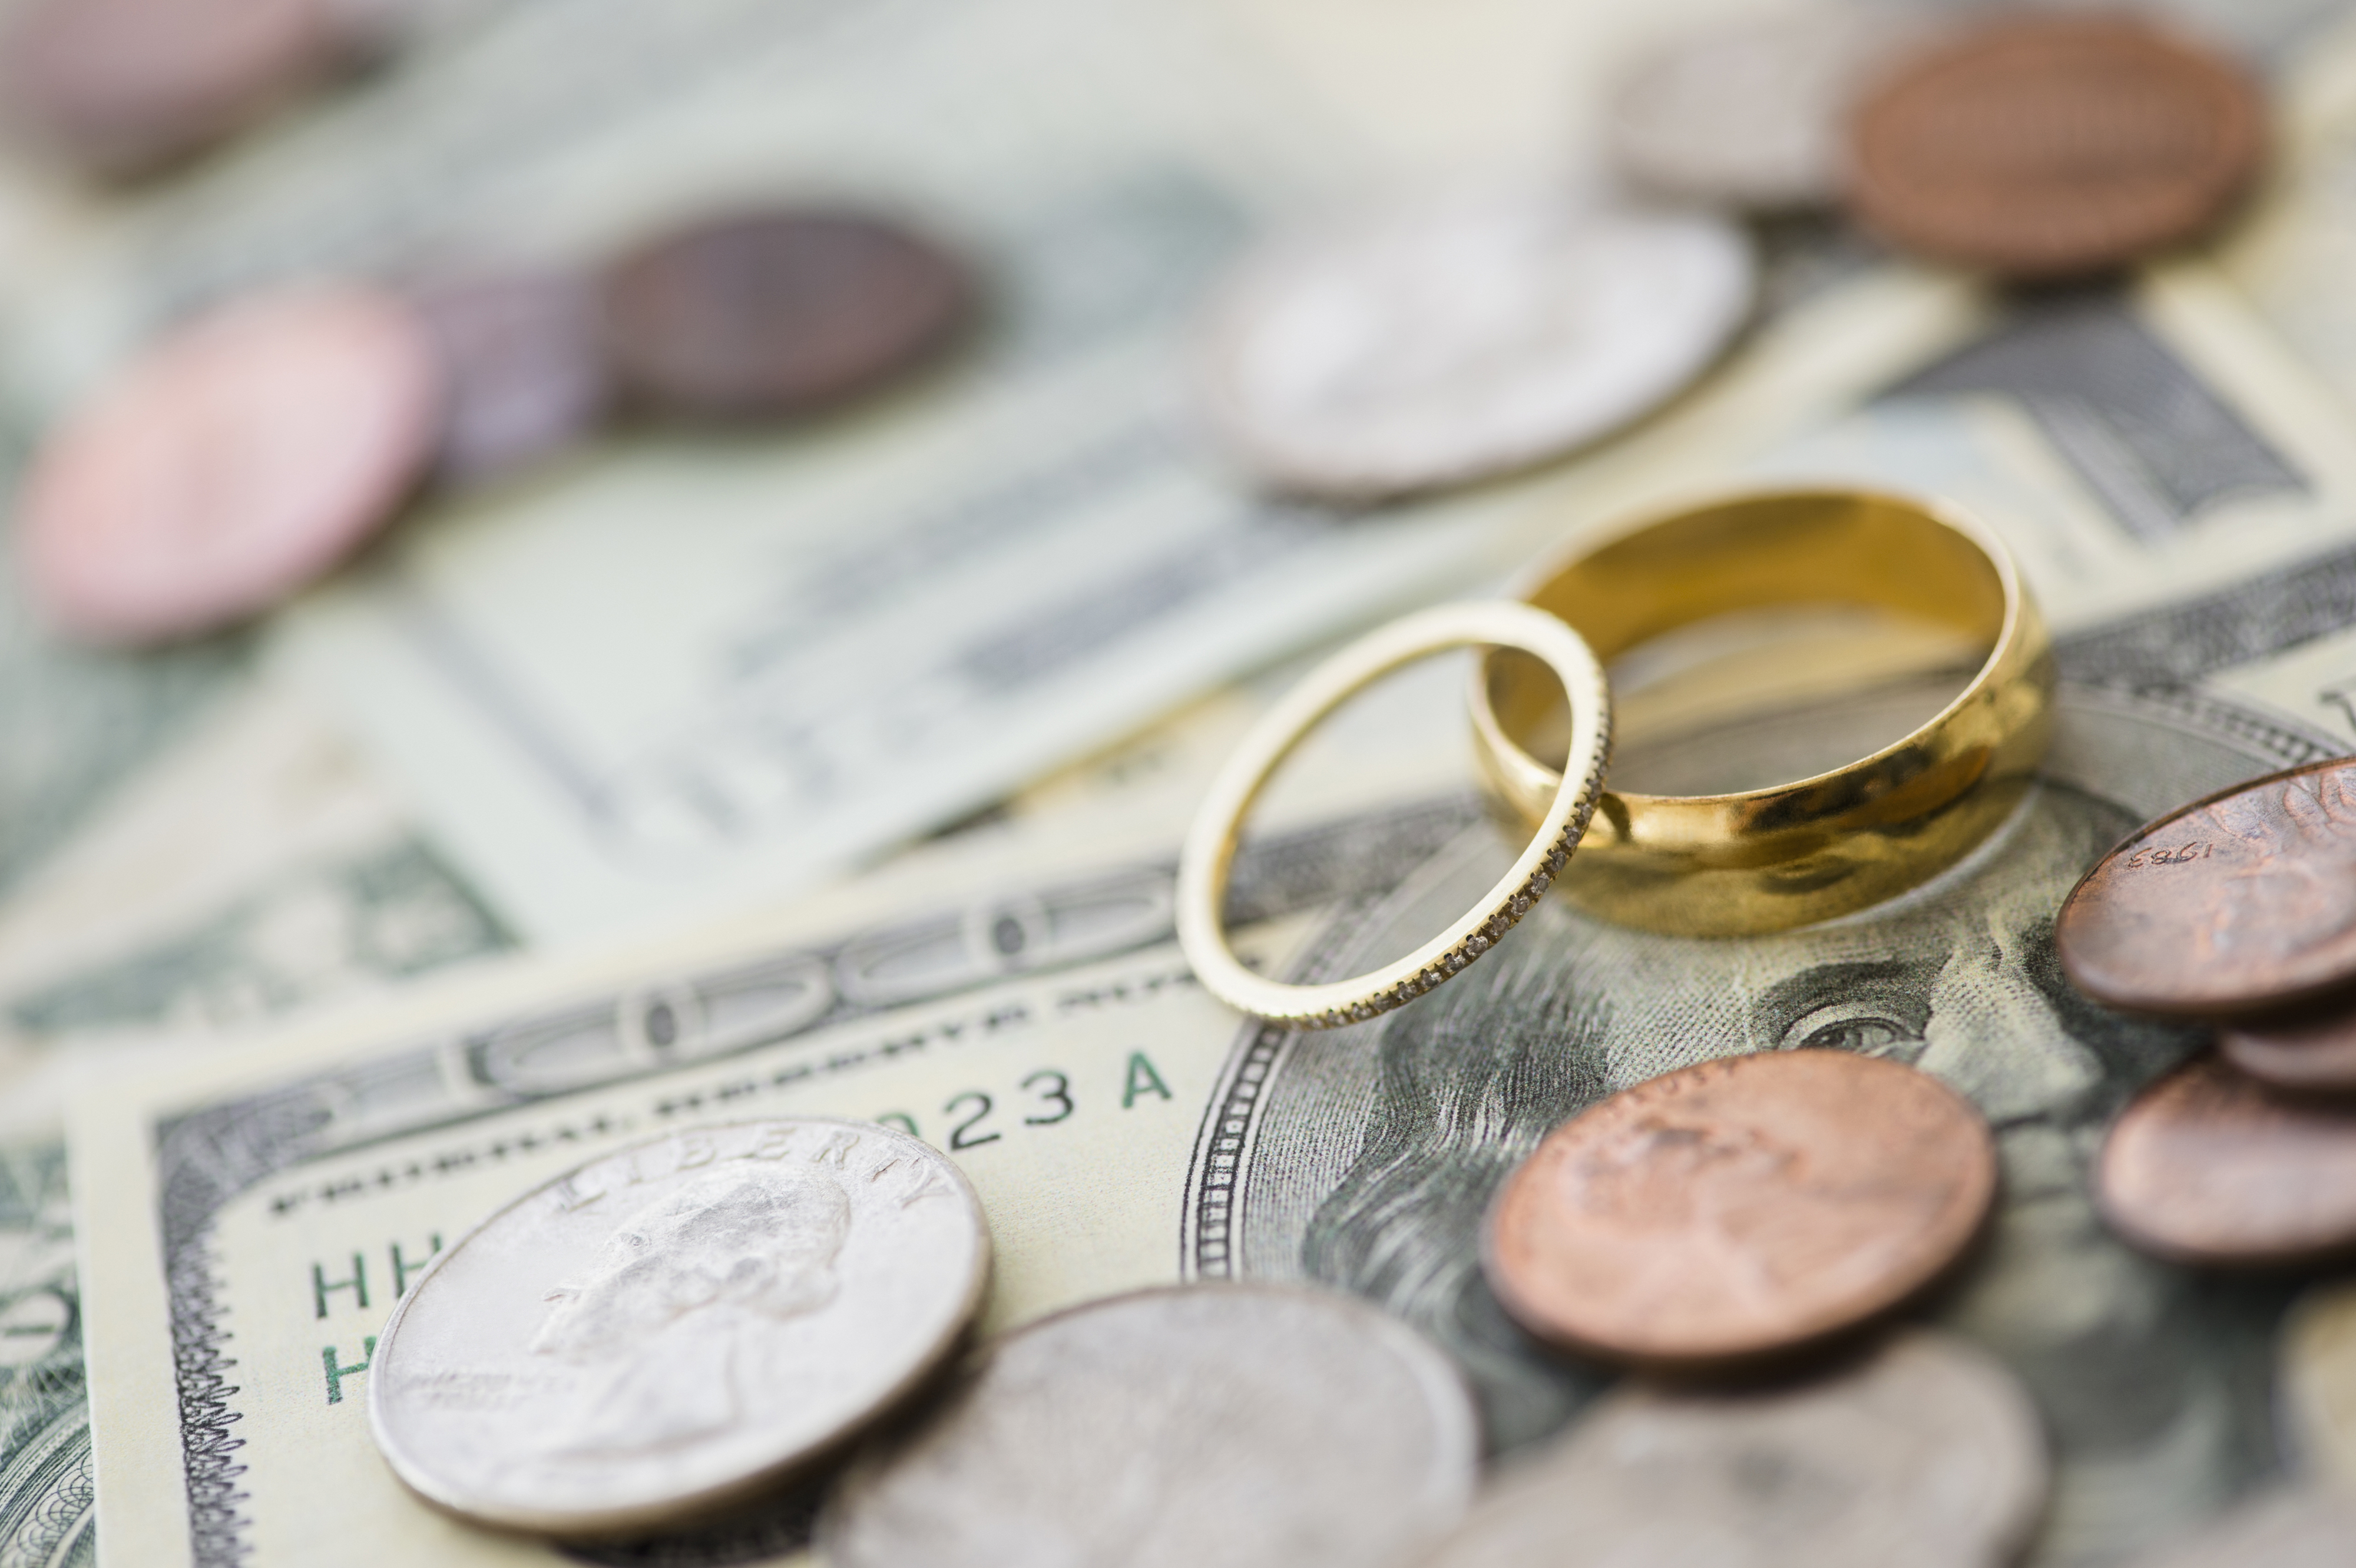 wedding bands sitting on top of bills and coins